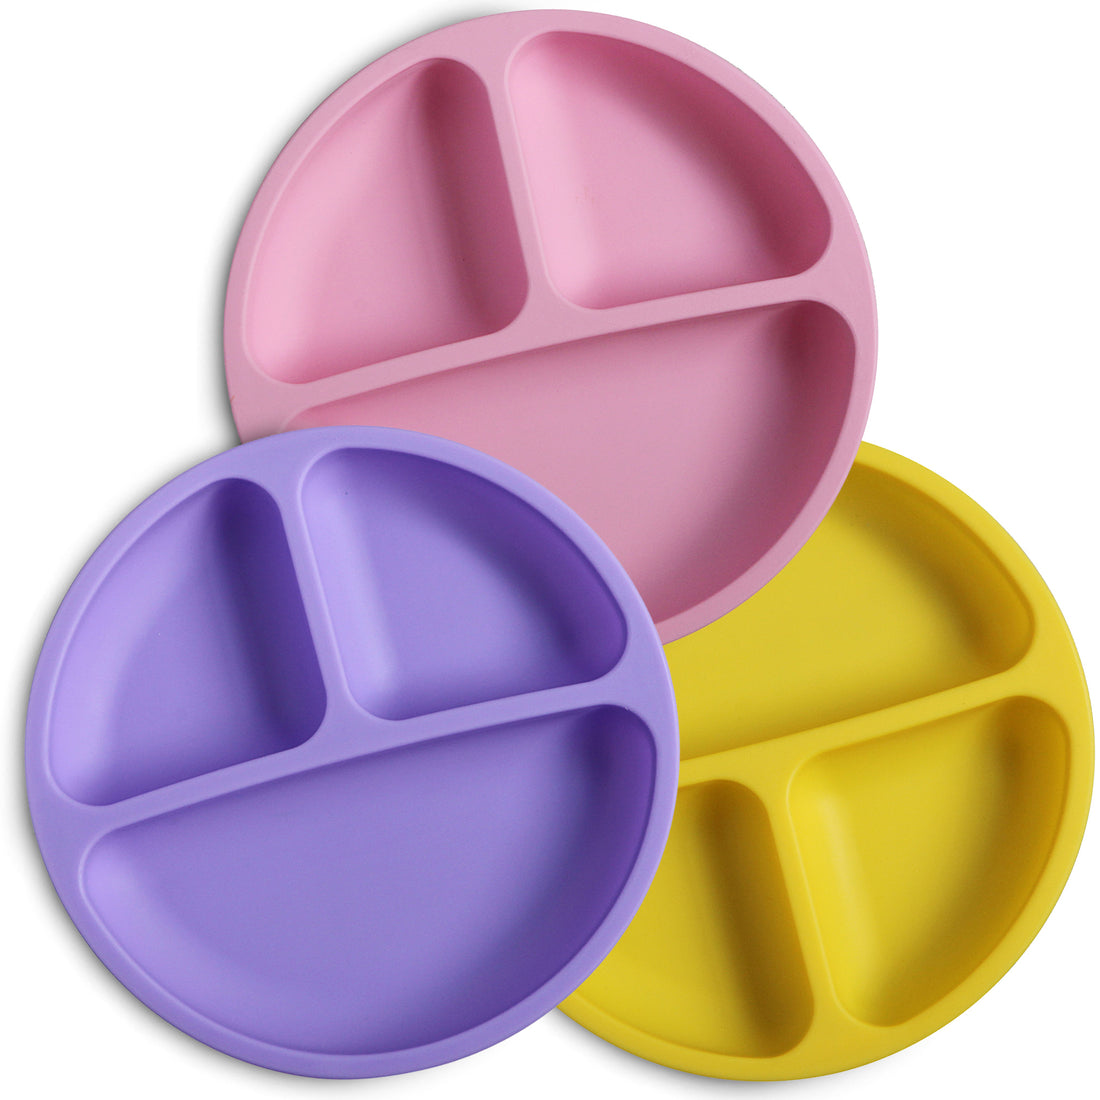 Divided Silicone toddler plates in pink, purple, and yellow